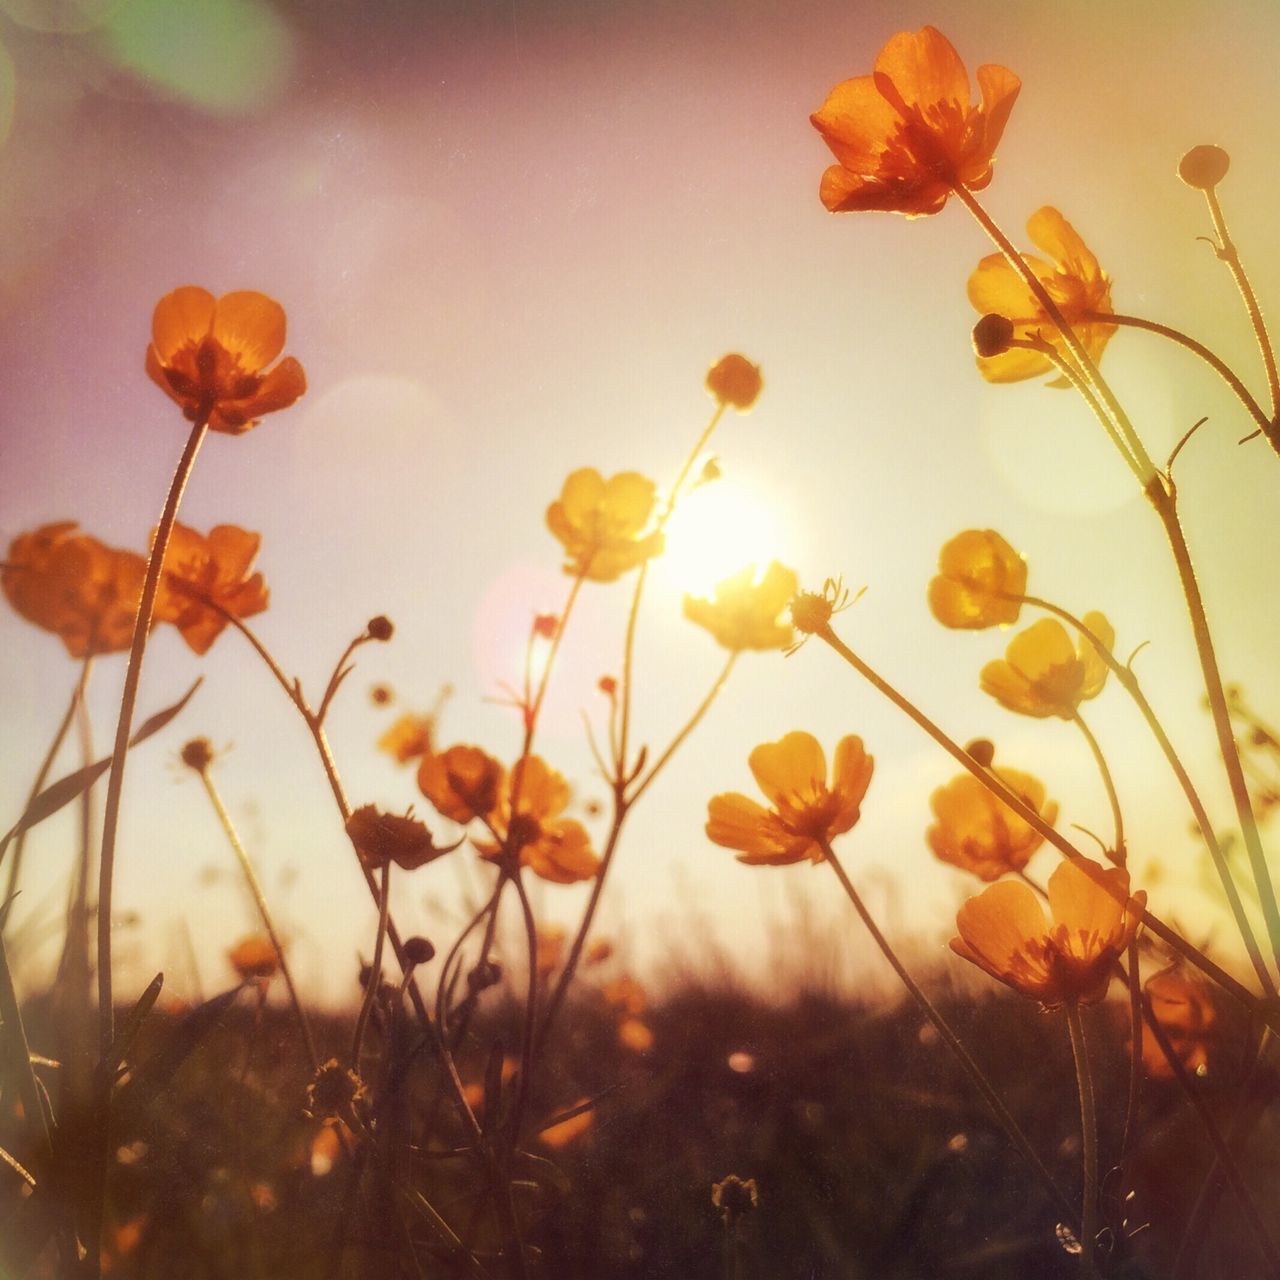 flower, growth, freshness, plant, fragility, beauty in nature, nature, stem, petal, sunset, yellow, field, focus on foreground, sky, blooming, orange color, close-up, in bloom, sunlight, no people